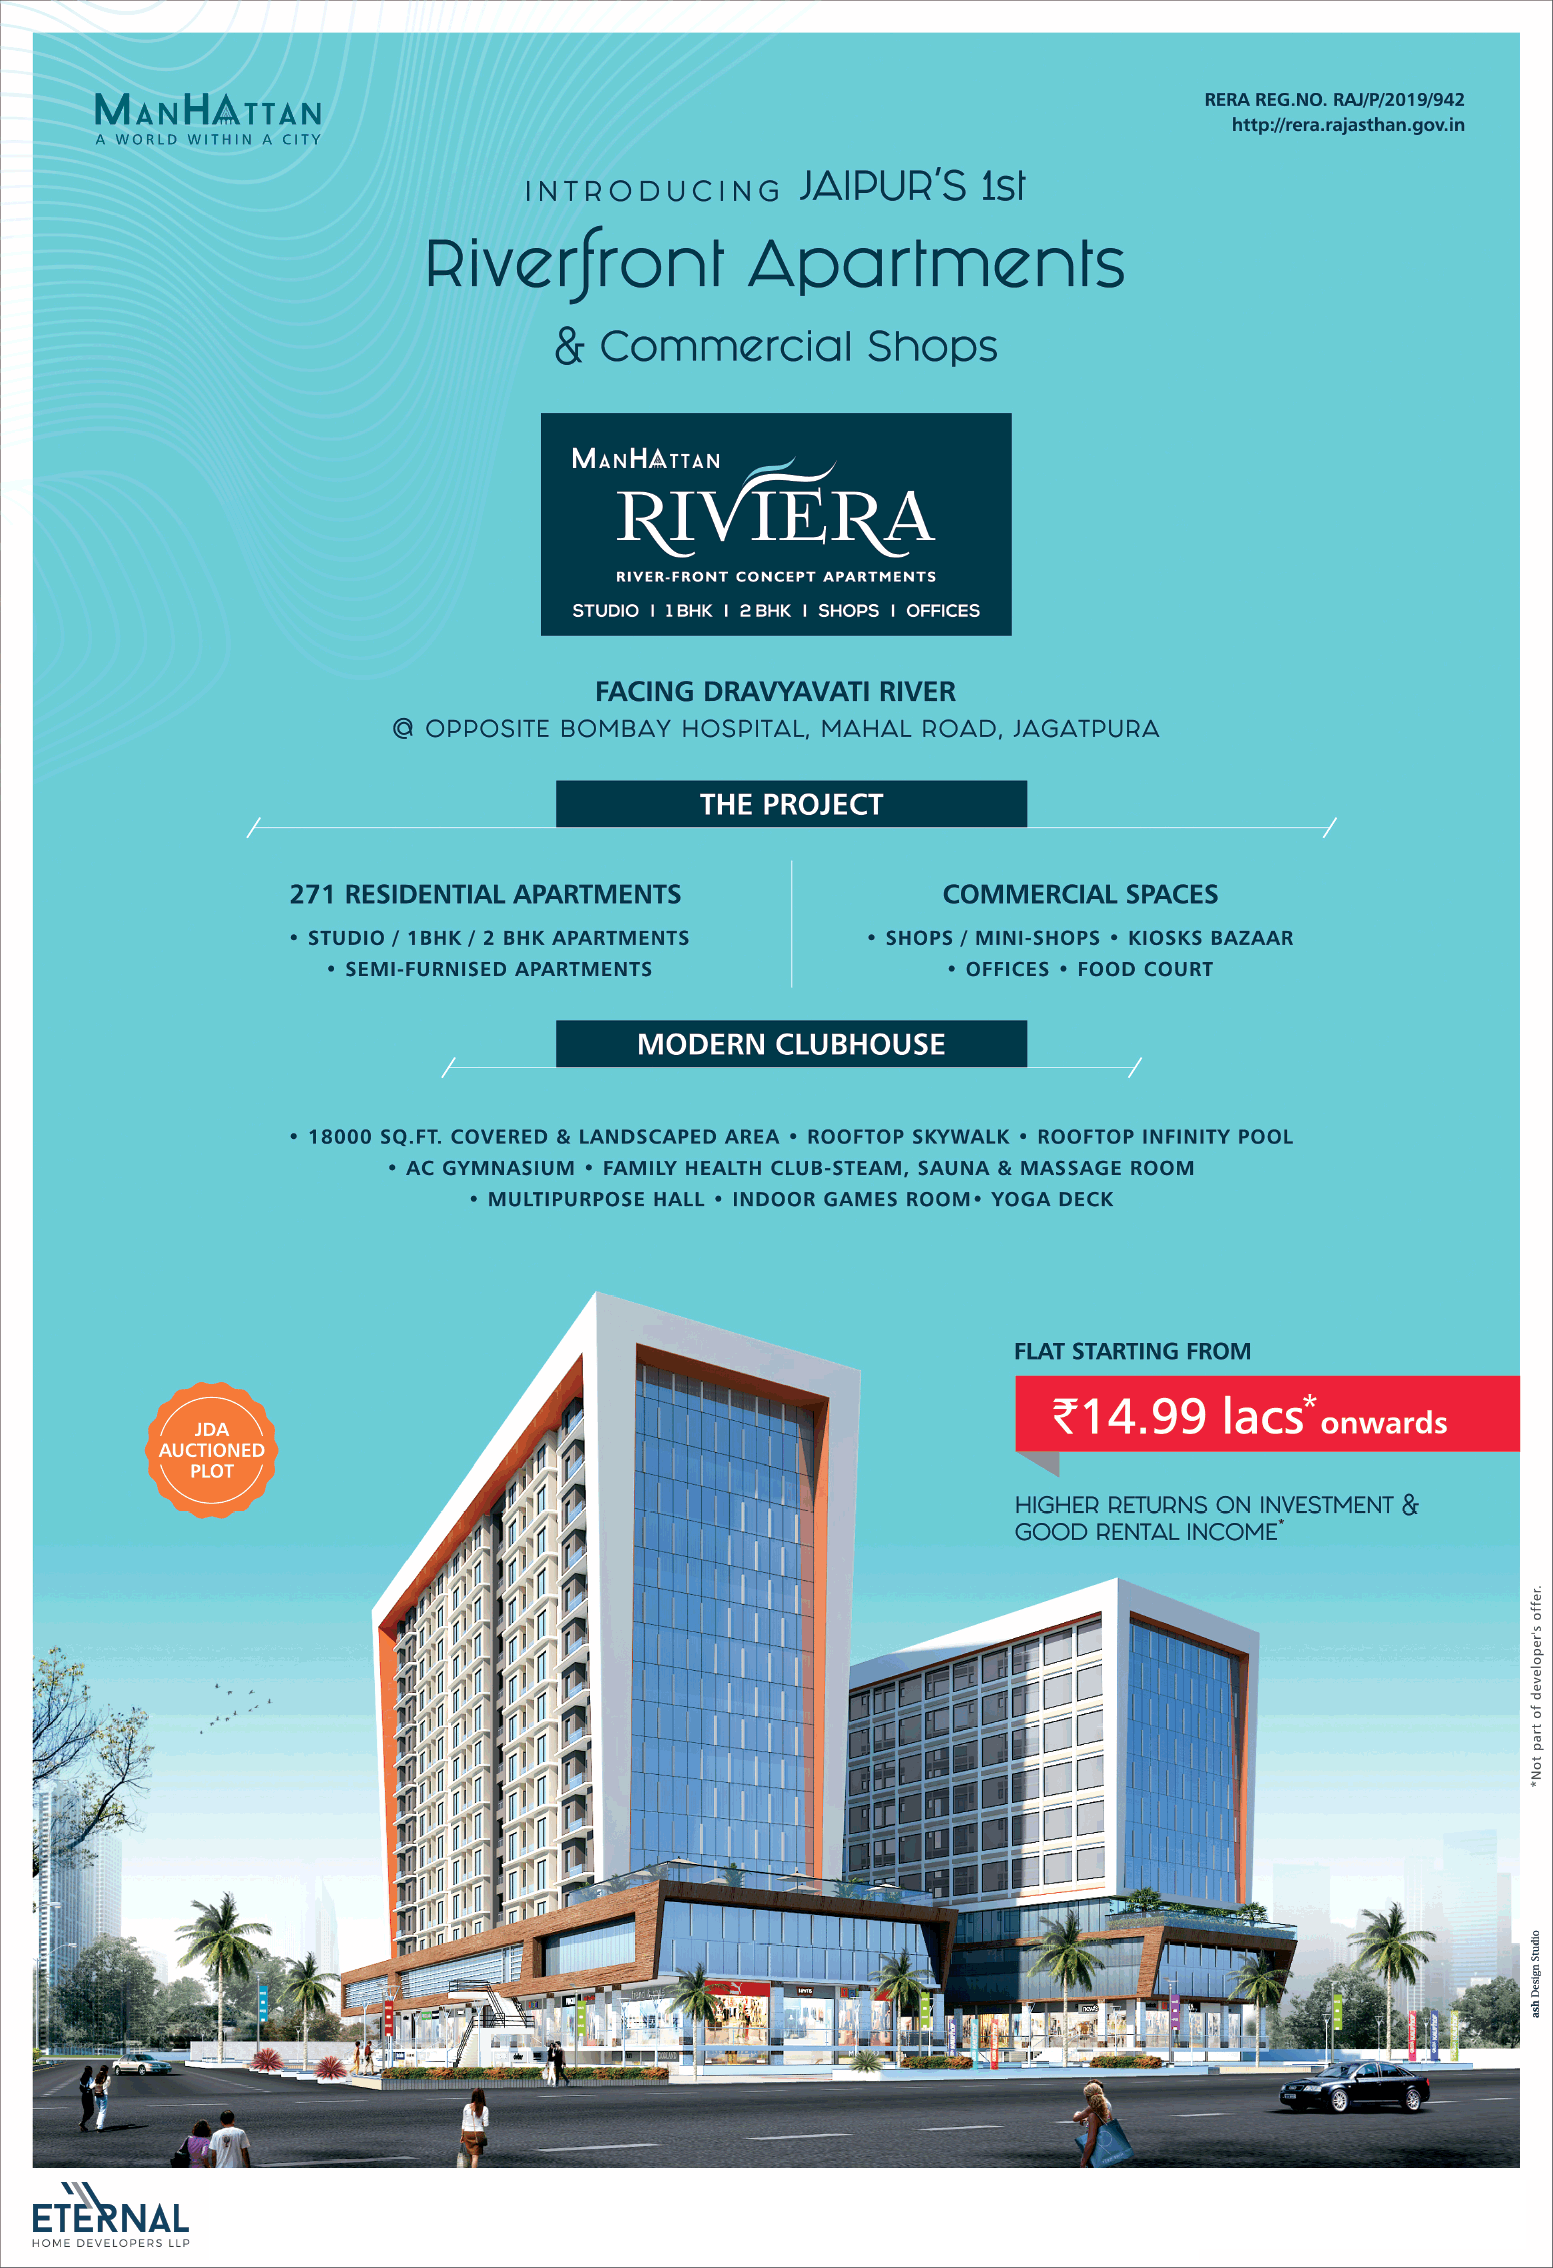 Introducing riverfront apartments & commercial shops at Manhattan Rivera in Jaipur Update